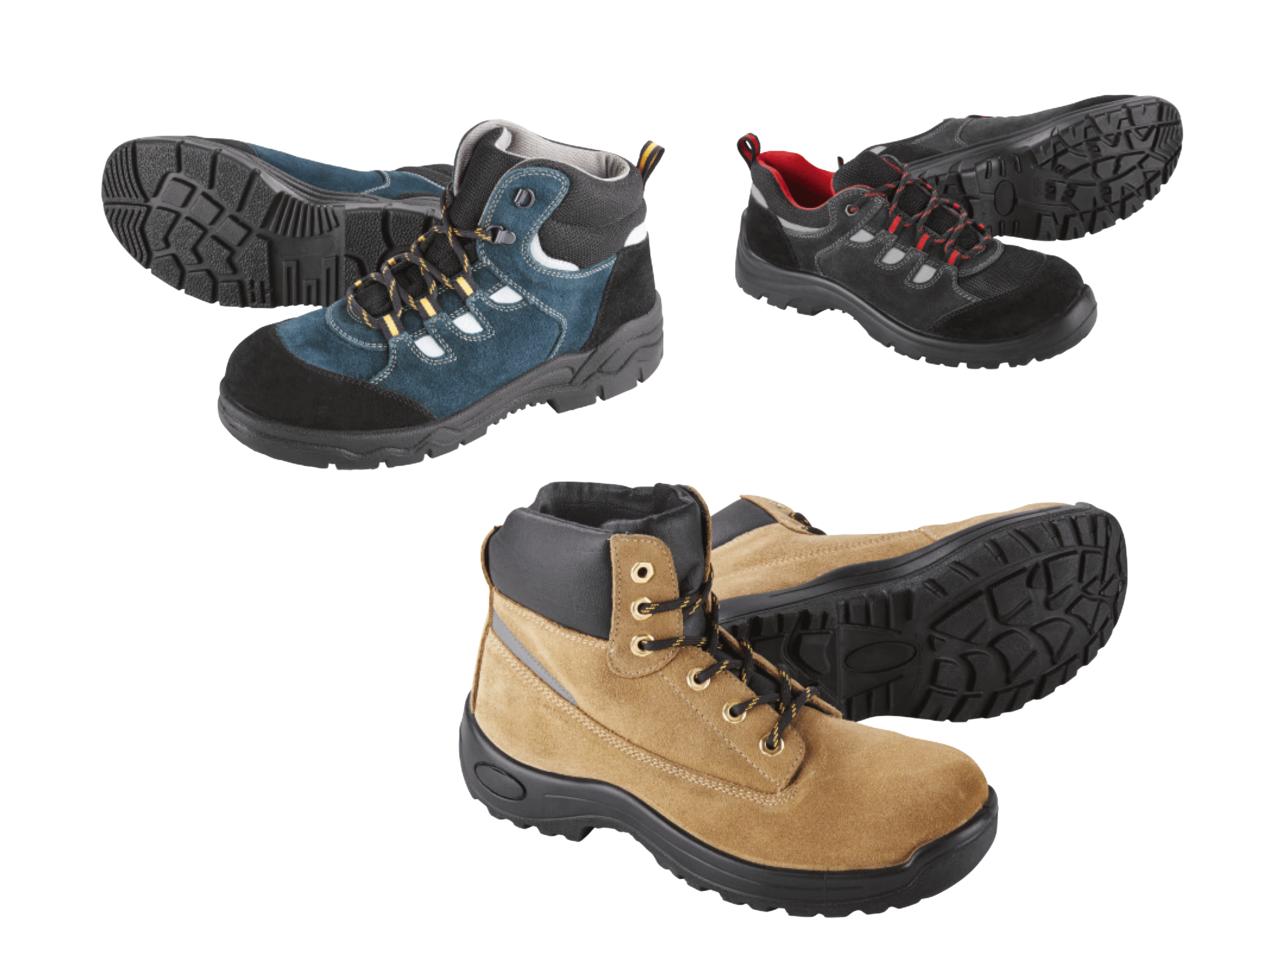 POWERFIX Leather Safety S3 Boots/Shoes